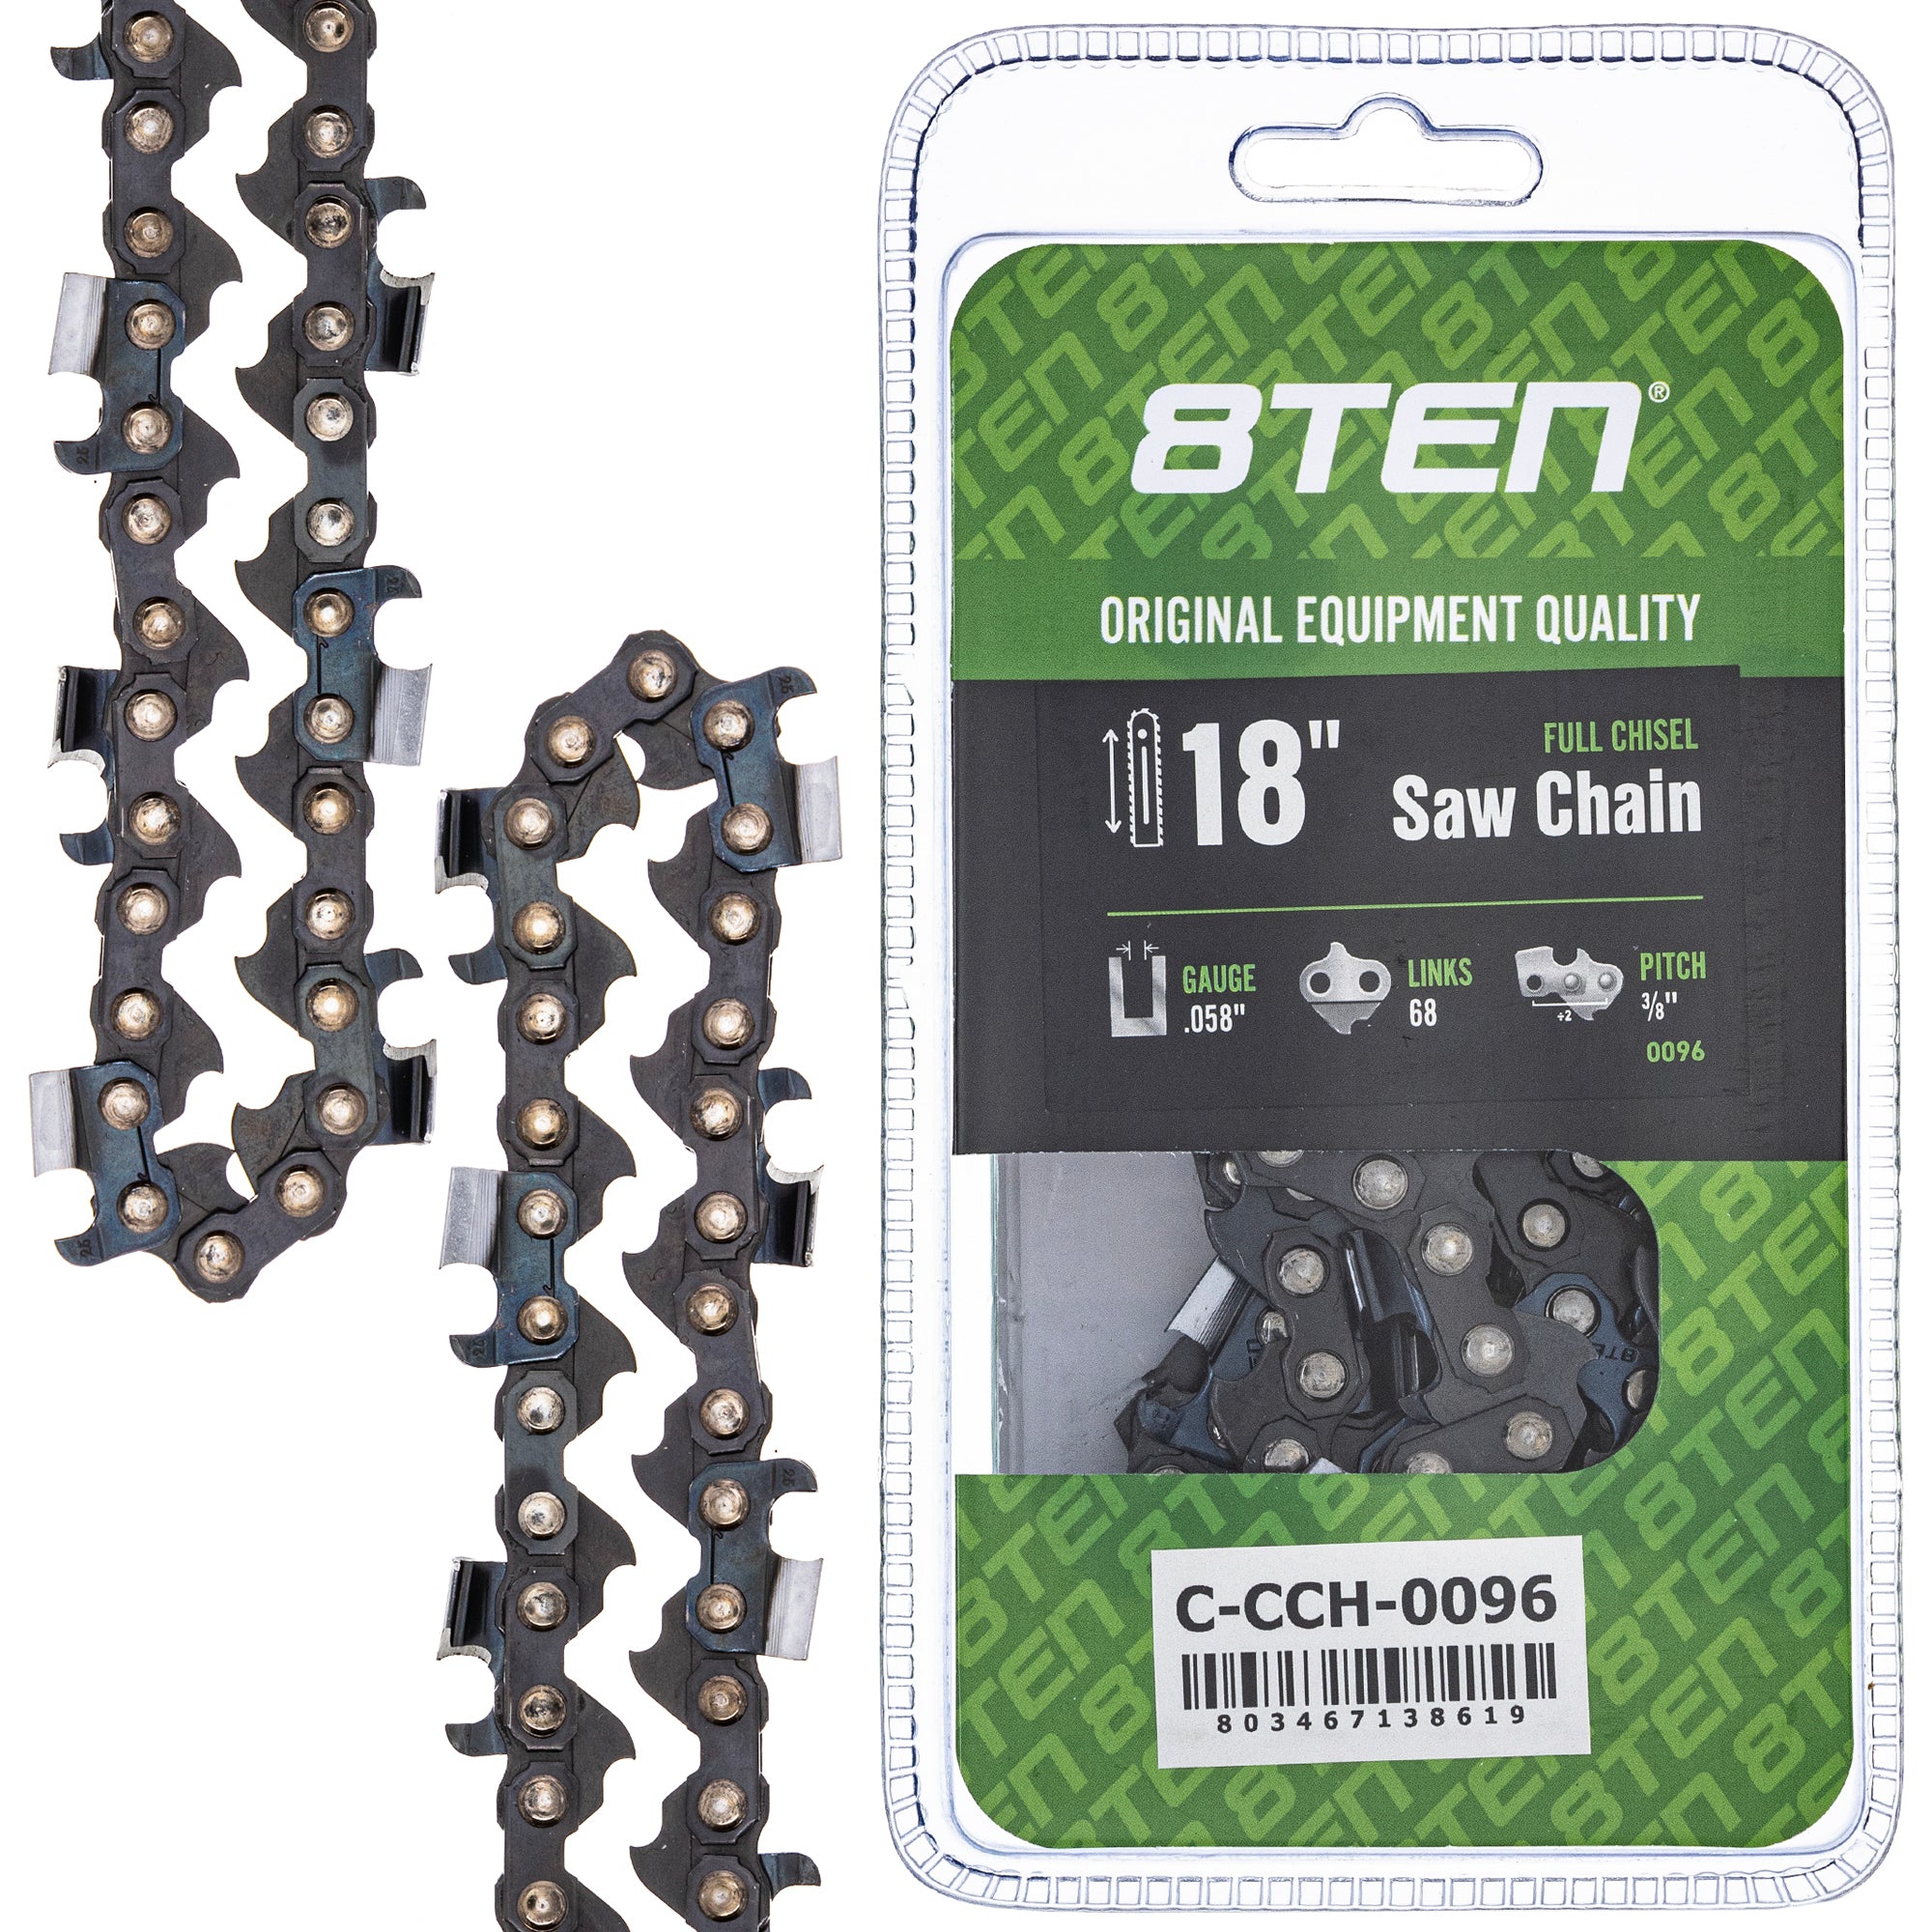 8TEN MK1010447 Guide Bar & Chain for S-65 S-55 S-50 R-440